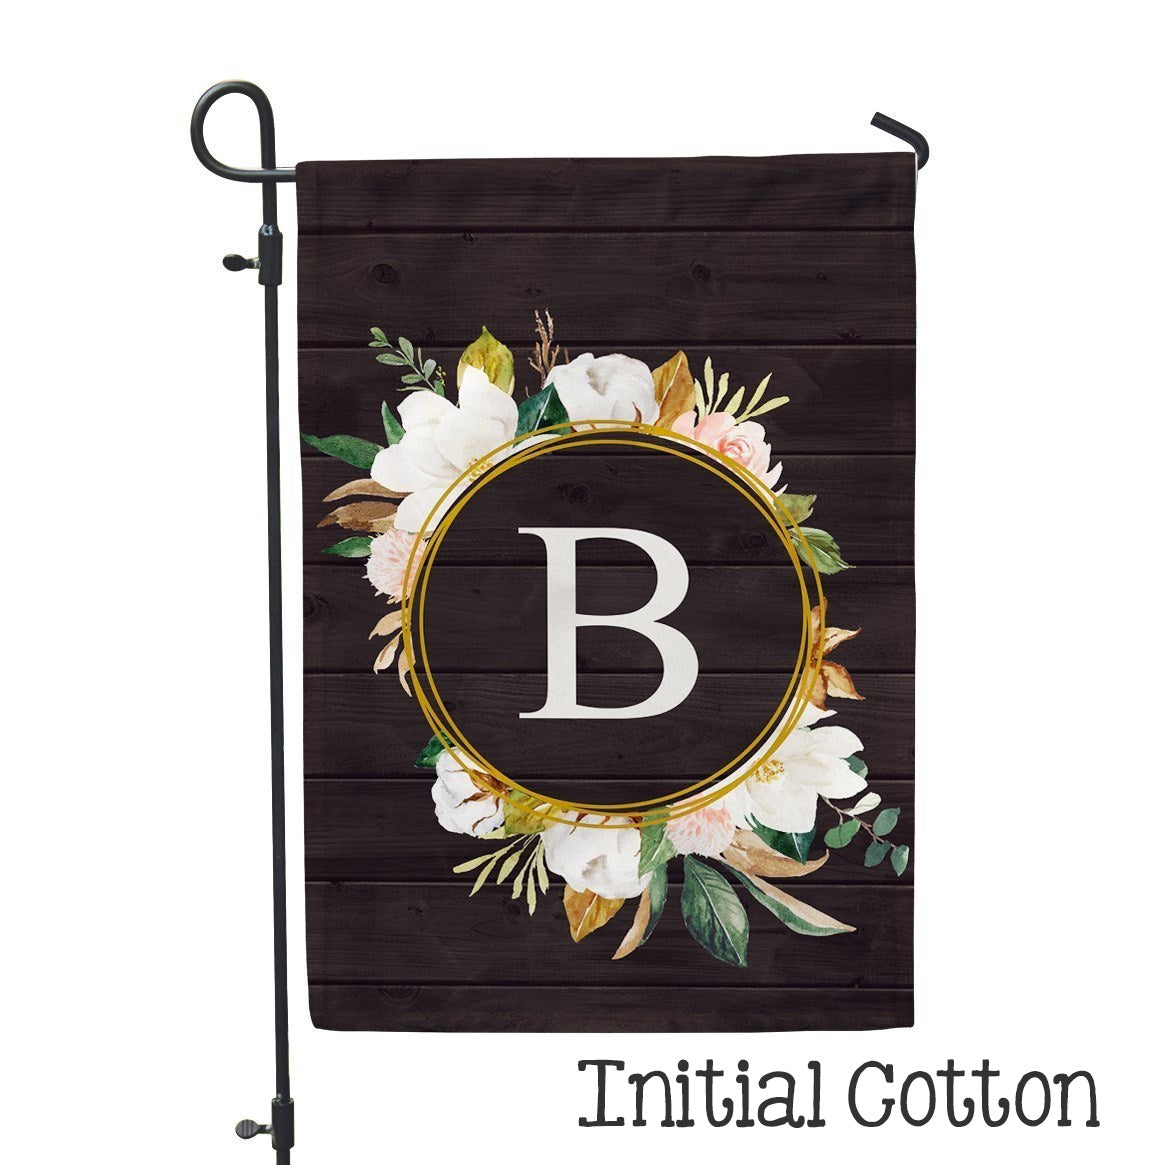 Personalized Garden Flag - Initial Cotton Home - 12" x 18" - Second East